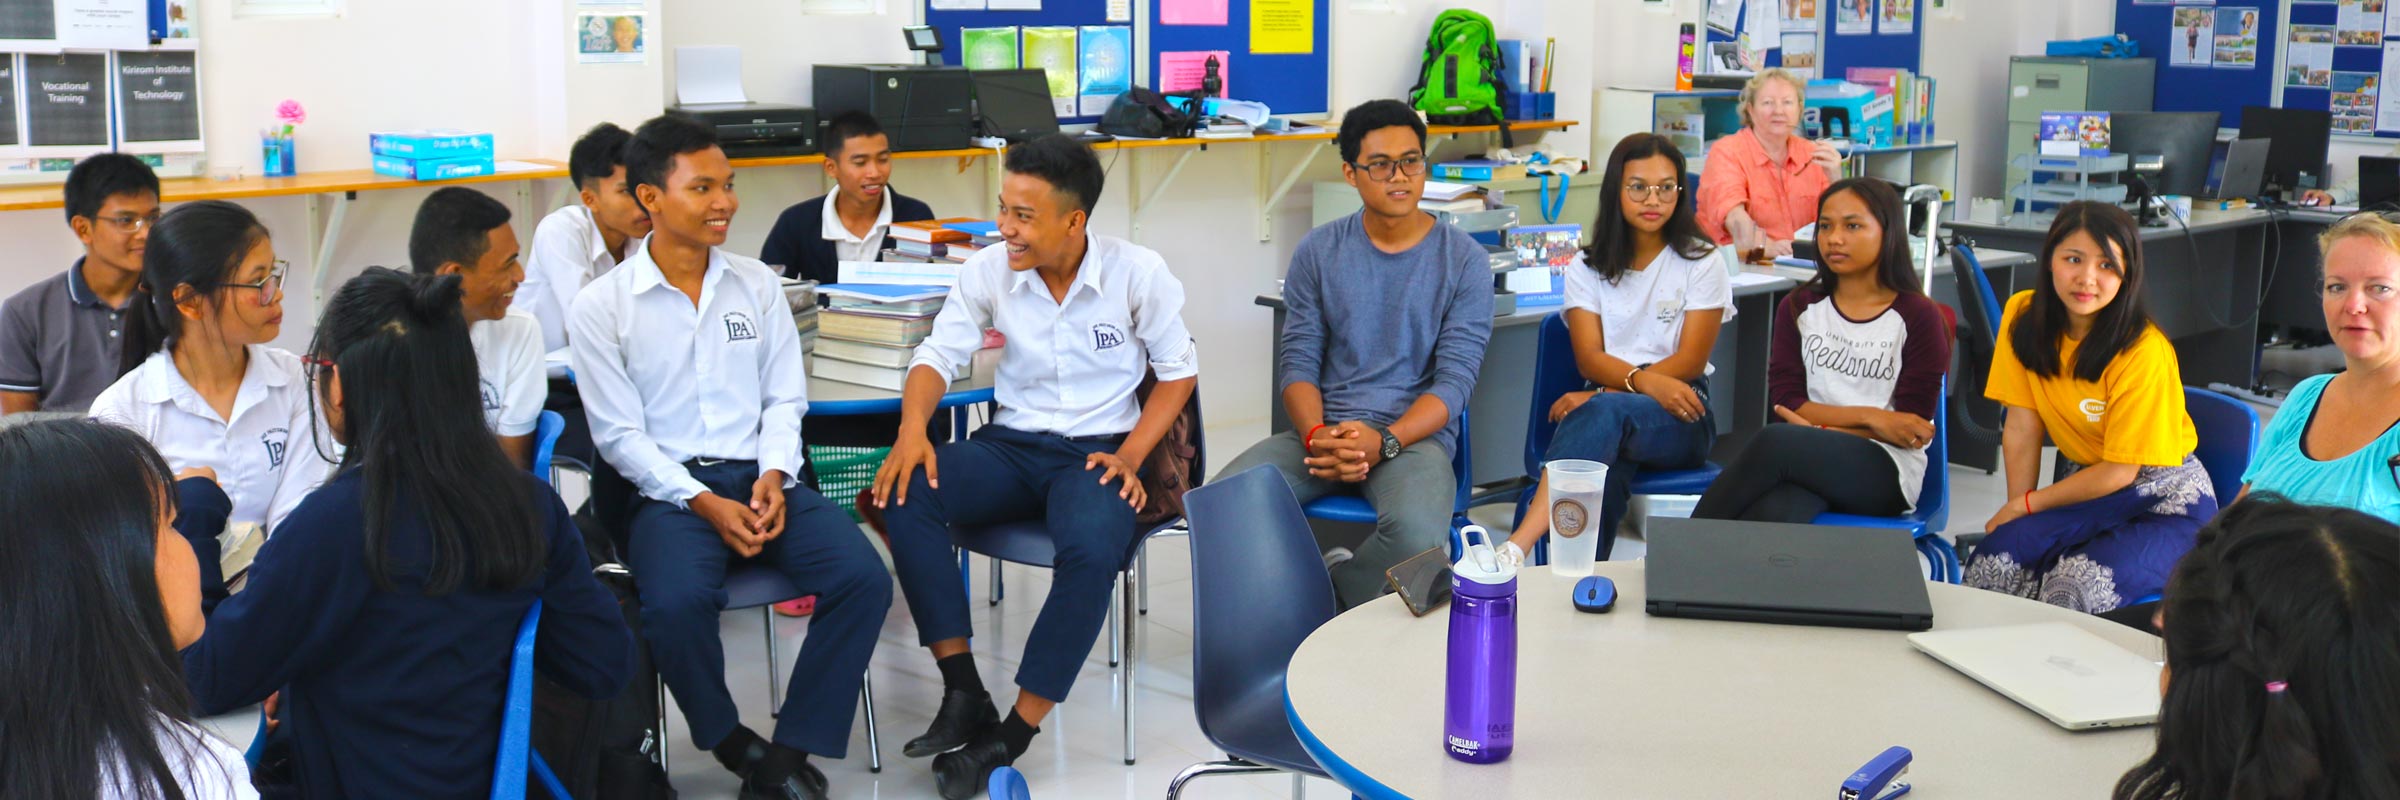 Jay Pritzker Academy, Siem Reap, Cambodia. JPA Alumni return to the JPA College Office to share their experiences with current JPA high school students and JPA teachers. Jay-Pritzker-Academy-Siem-Reap-Cambodia.